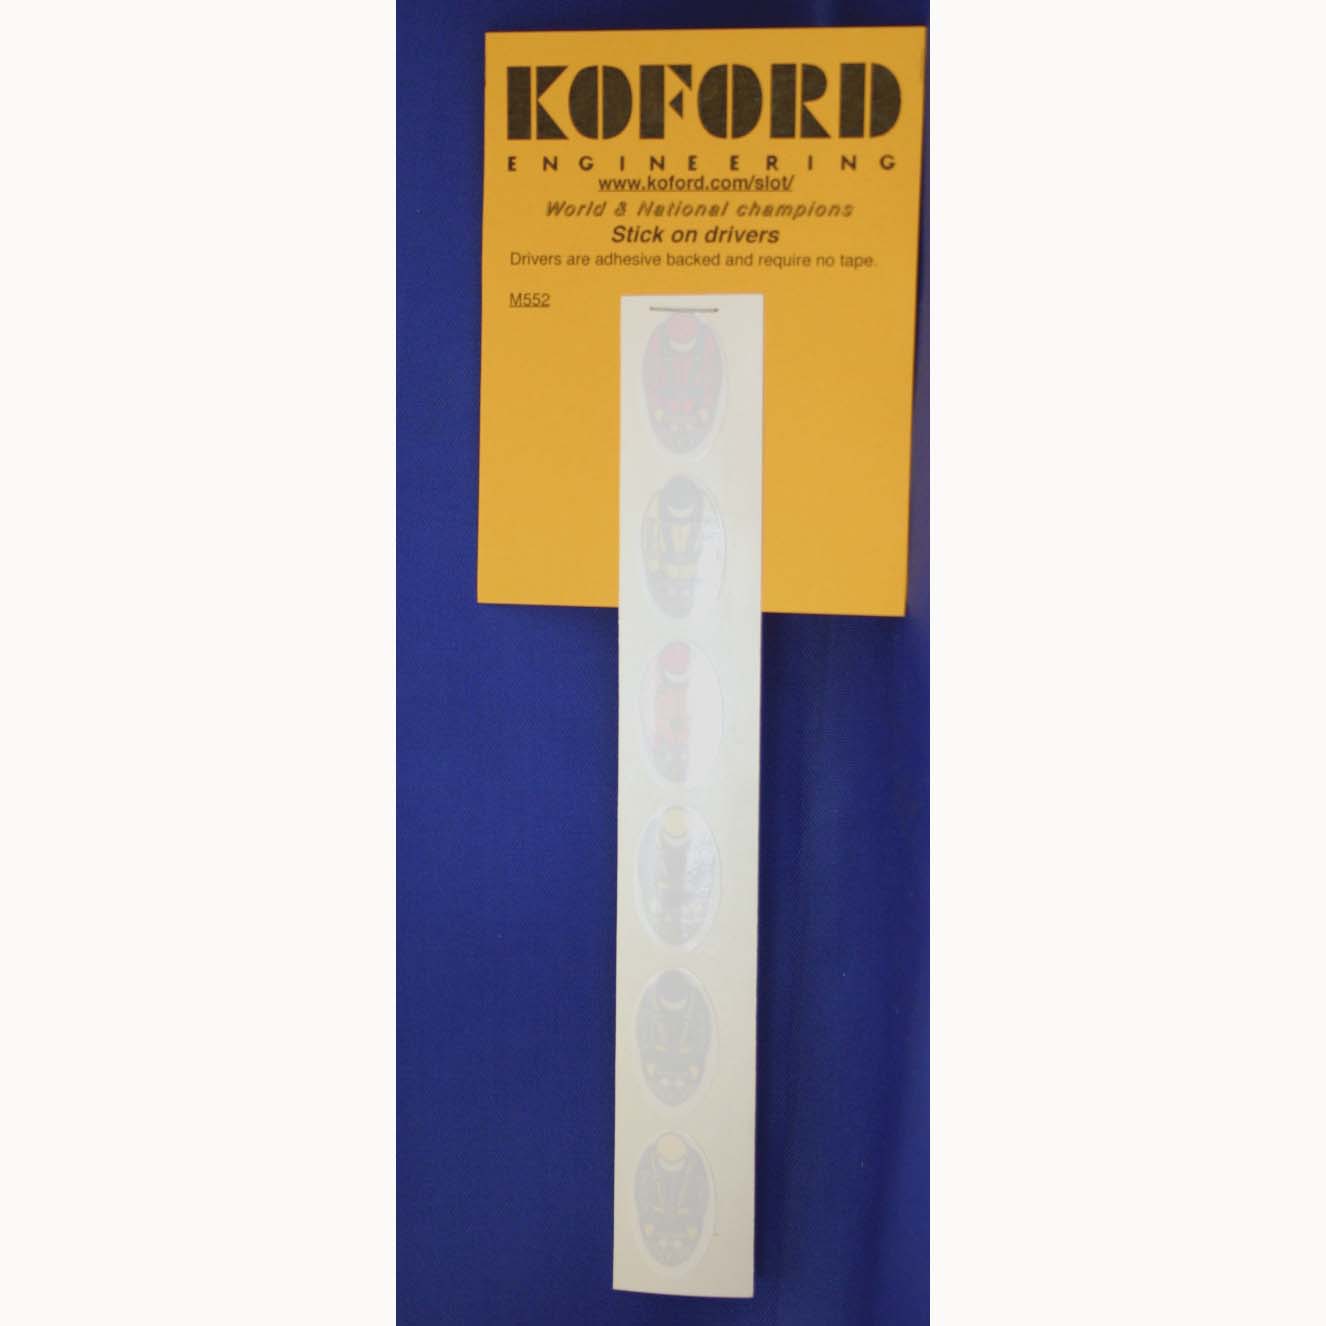 KOFORD STICK ON DRIVERS (now 8)